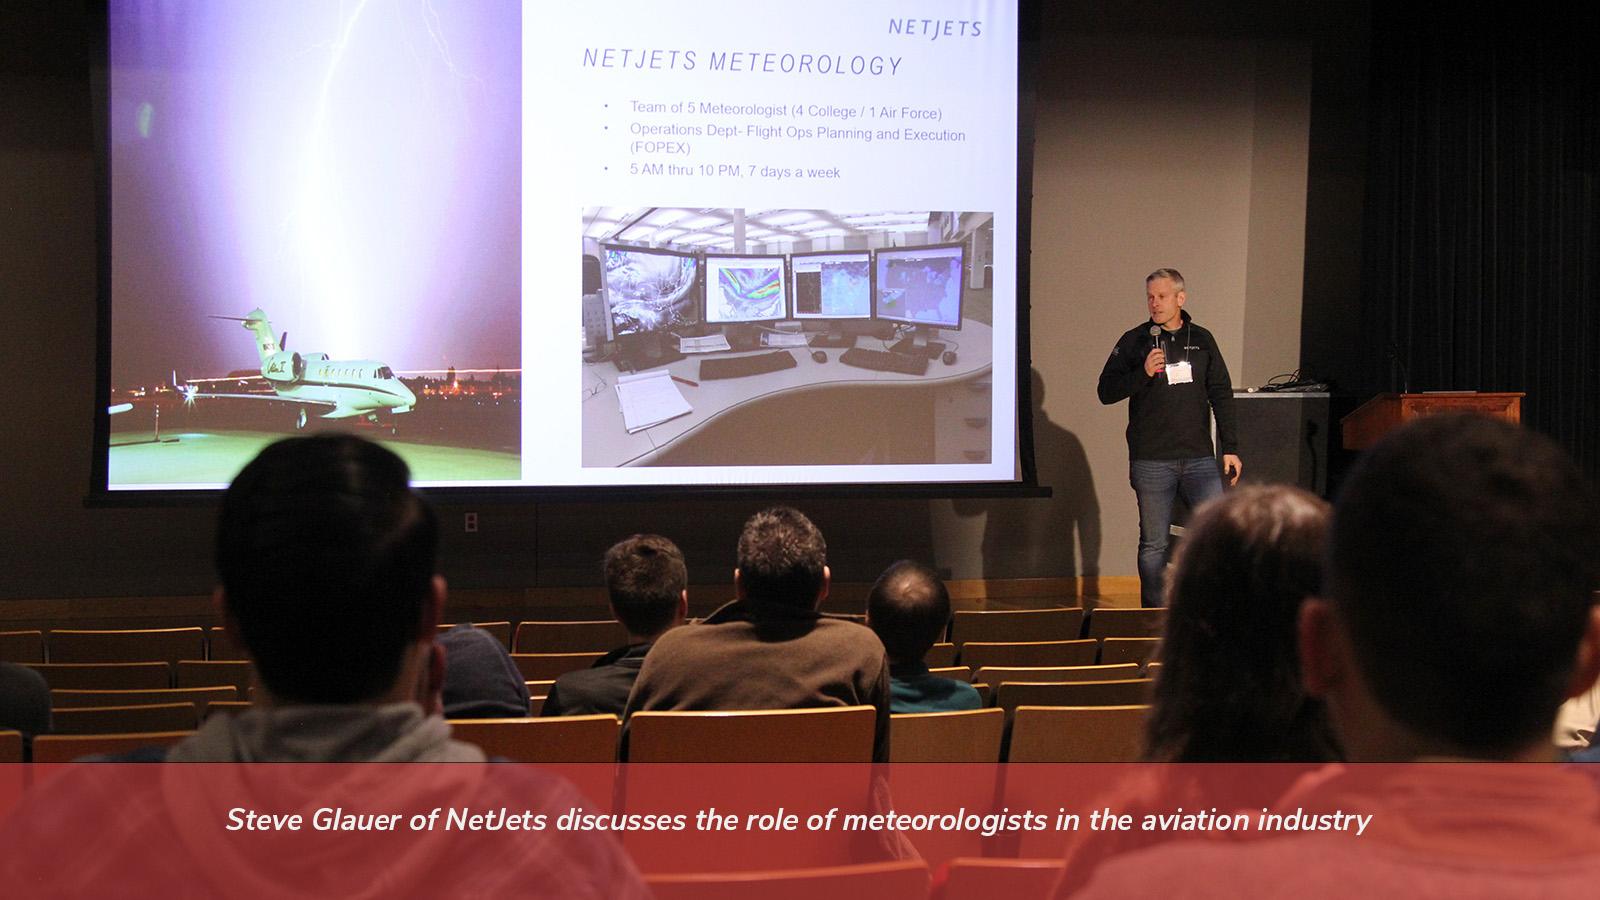 Steve Glauer of NetJets discusses the role of meteorologists in the aviation industry